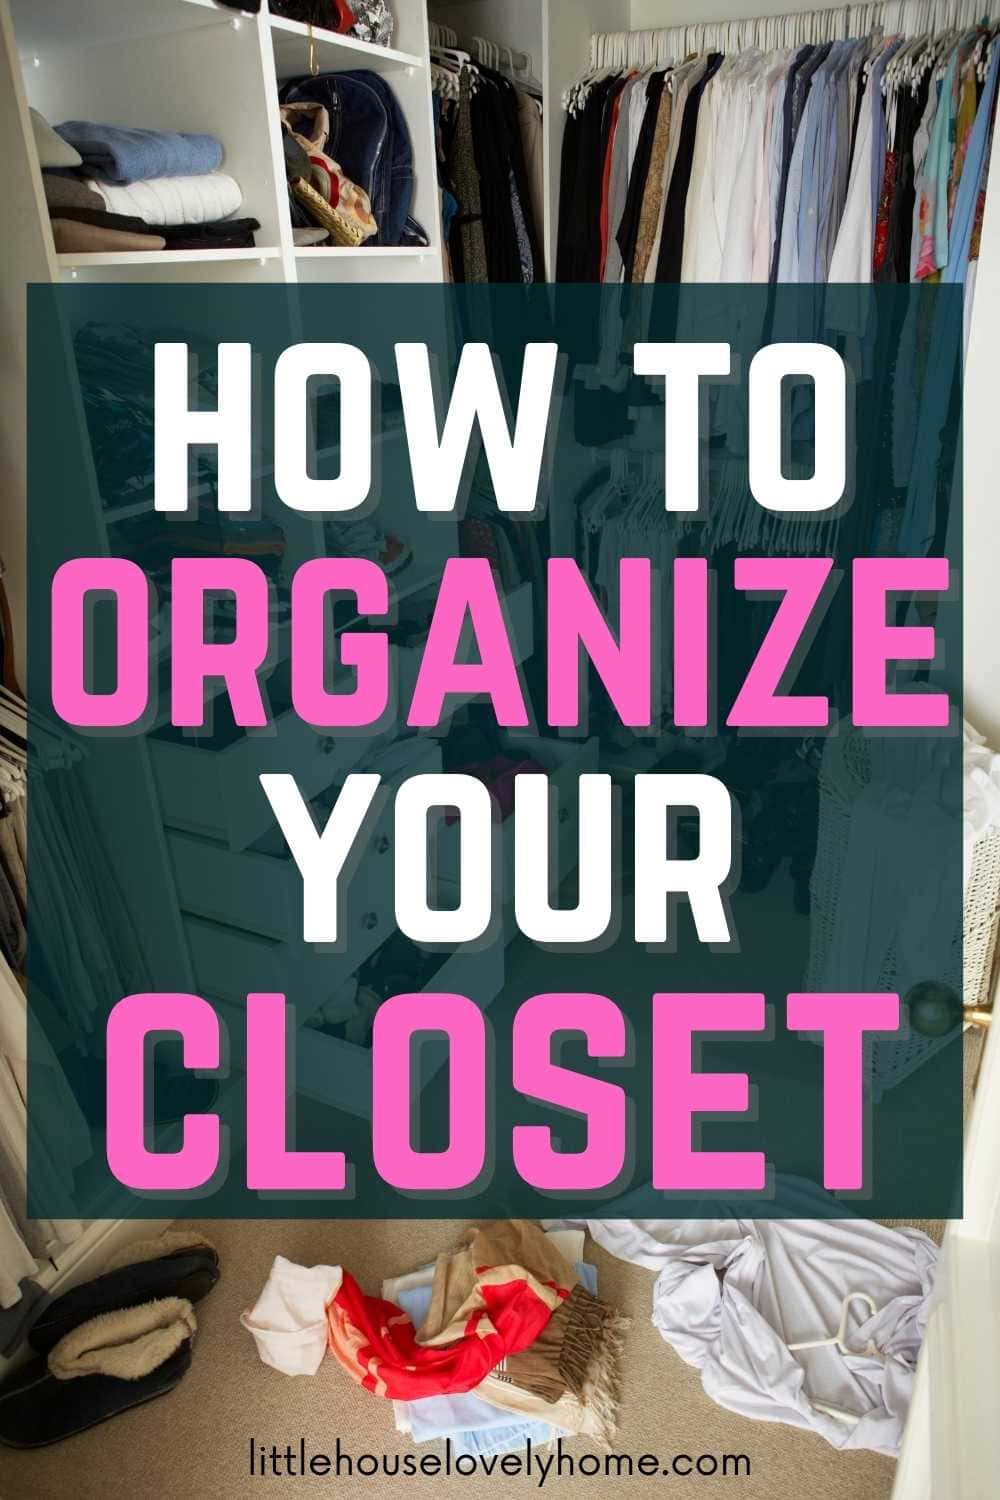 How To Organize A Closet In A Weekend | Little House Lovely Home